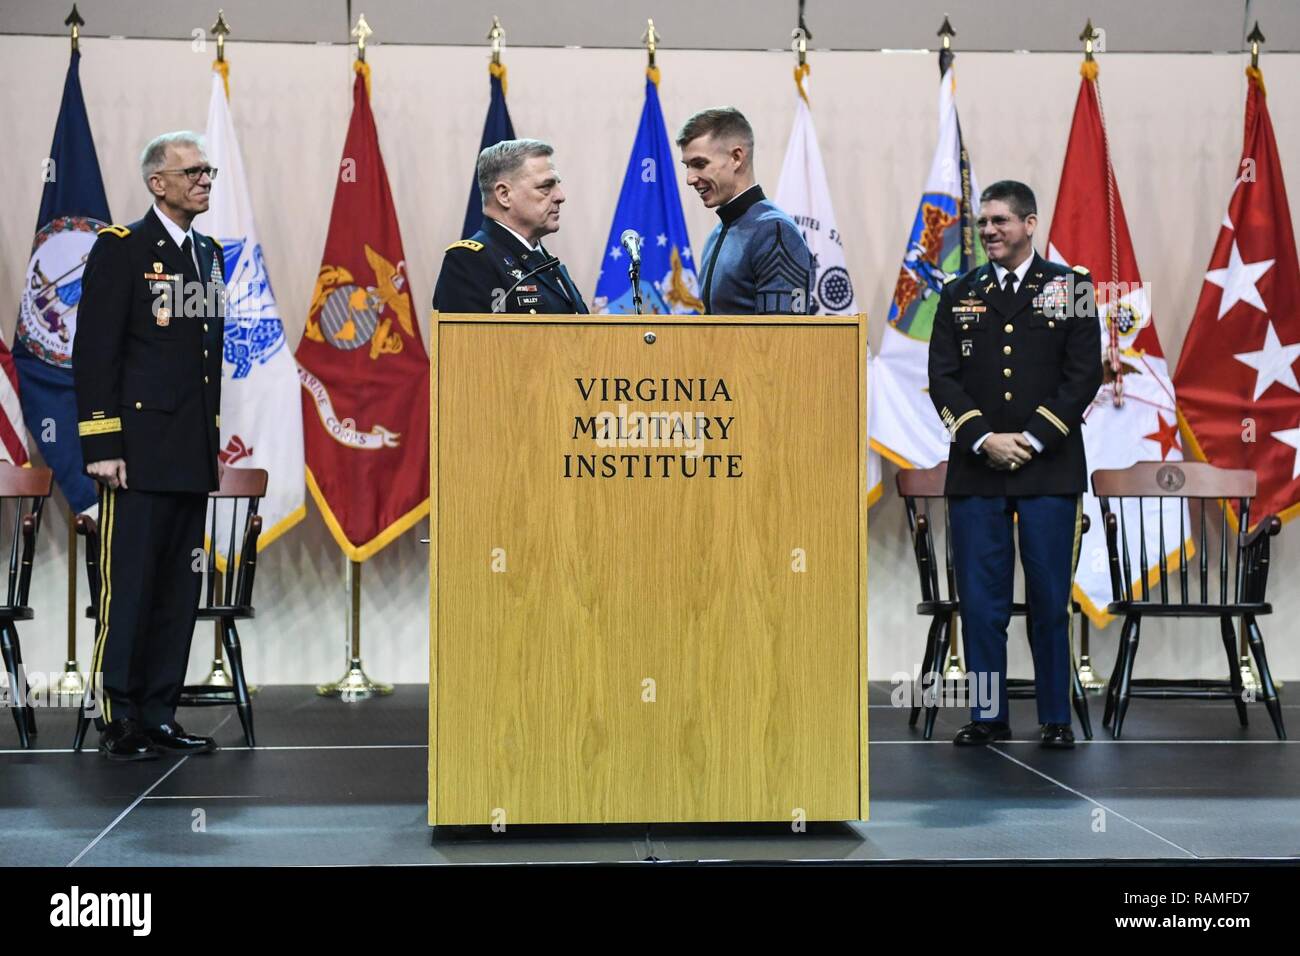 U.S. Army Chief of Staff Gen. Mark A. Milley listens to a cadet after he addressed the Corps of Cadets at the Virginia Military Institute, Lexington, Va., Feb. 8, 2017. Stock Photo